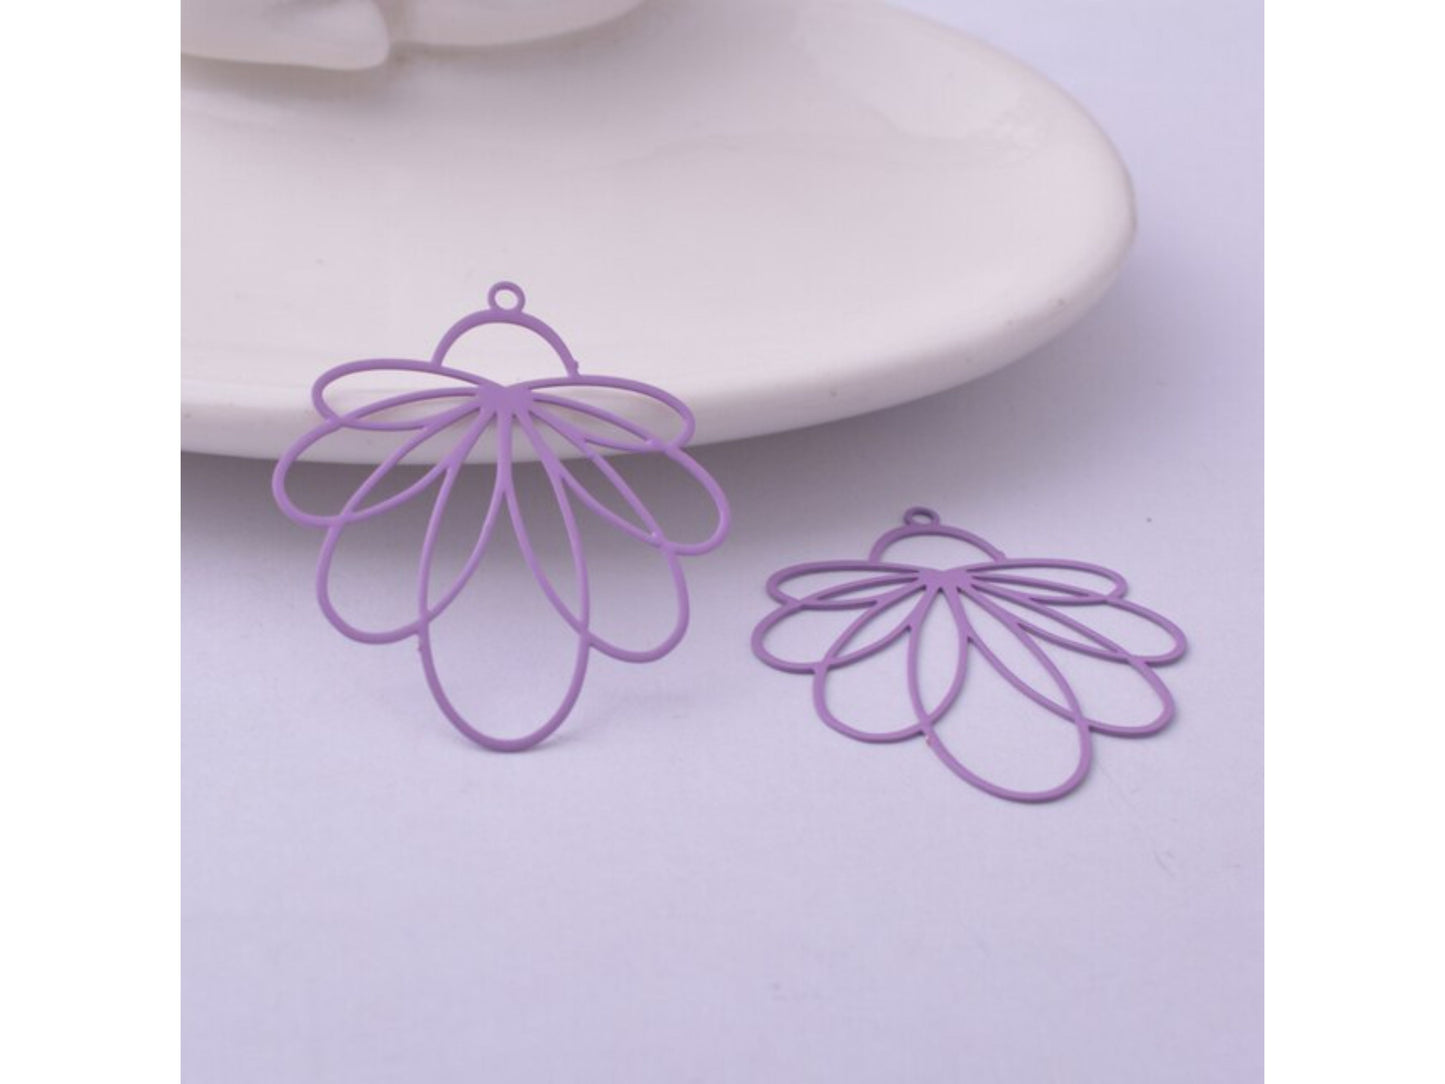 Floral Lily Filigree Earring Charm - 2ea (1 pair)